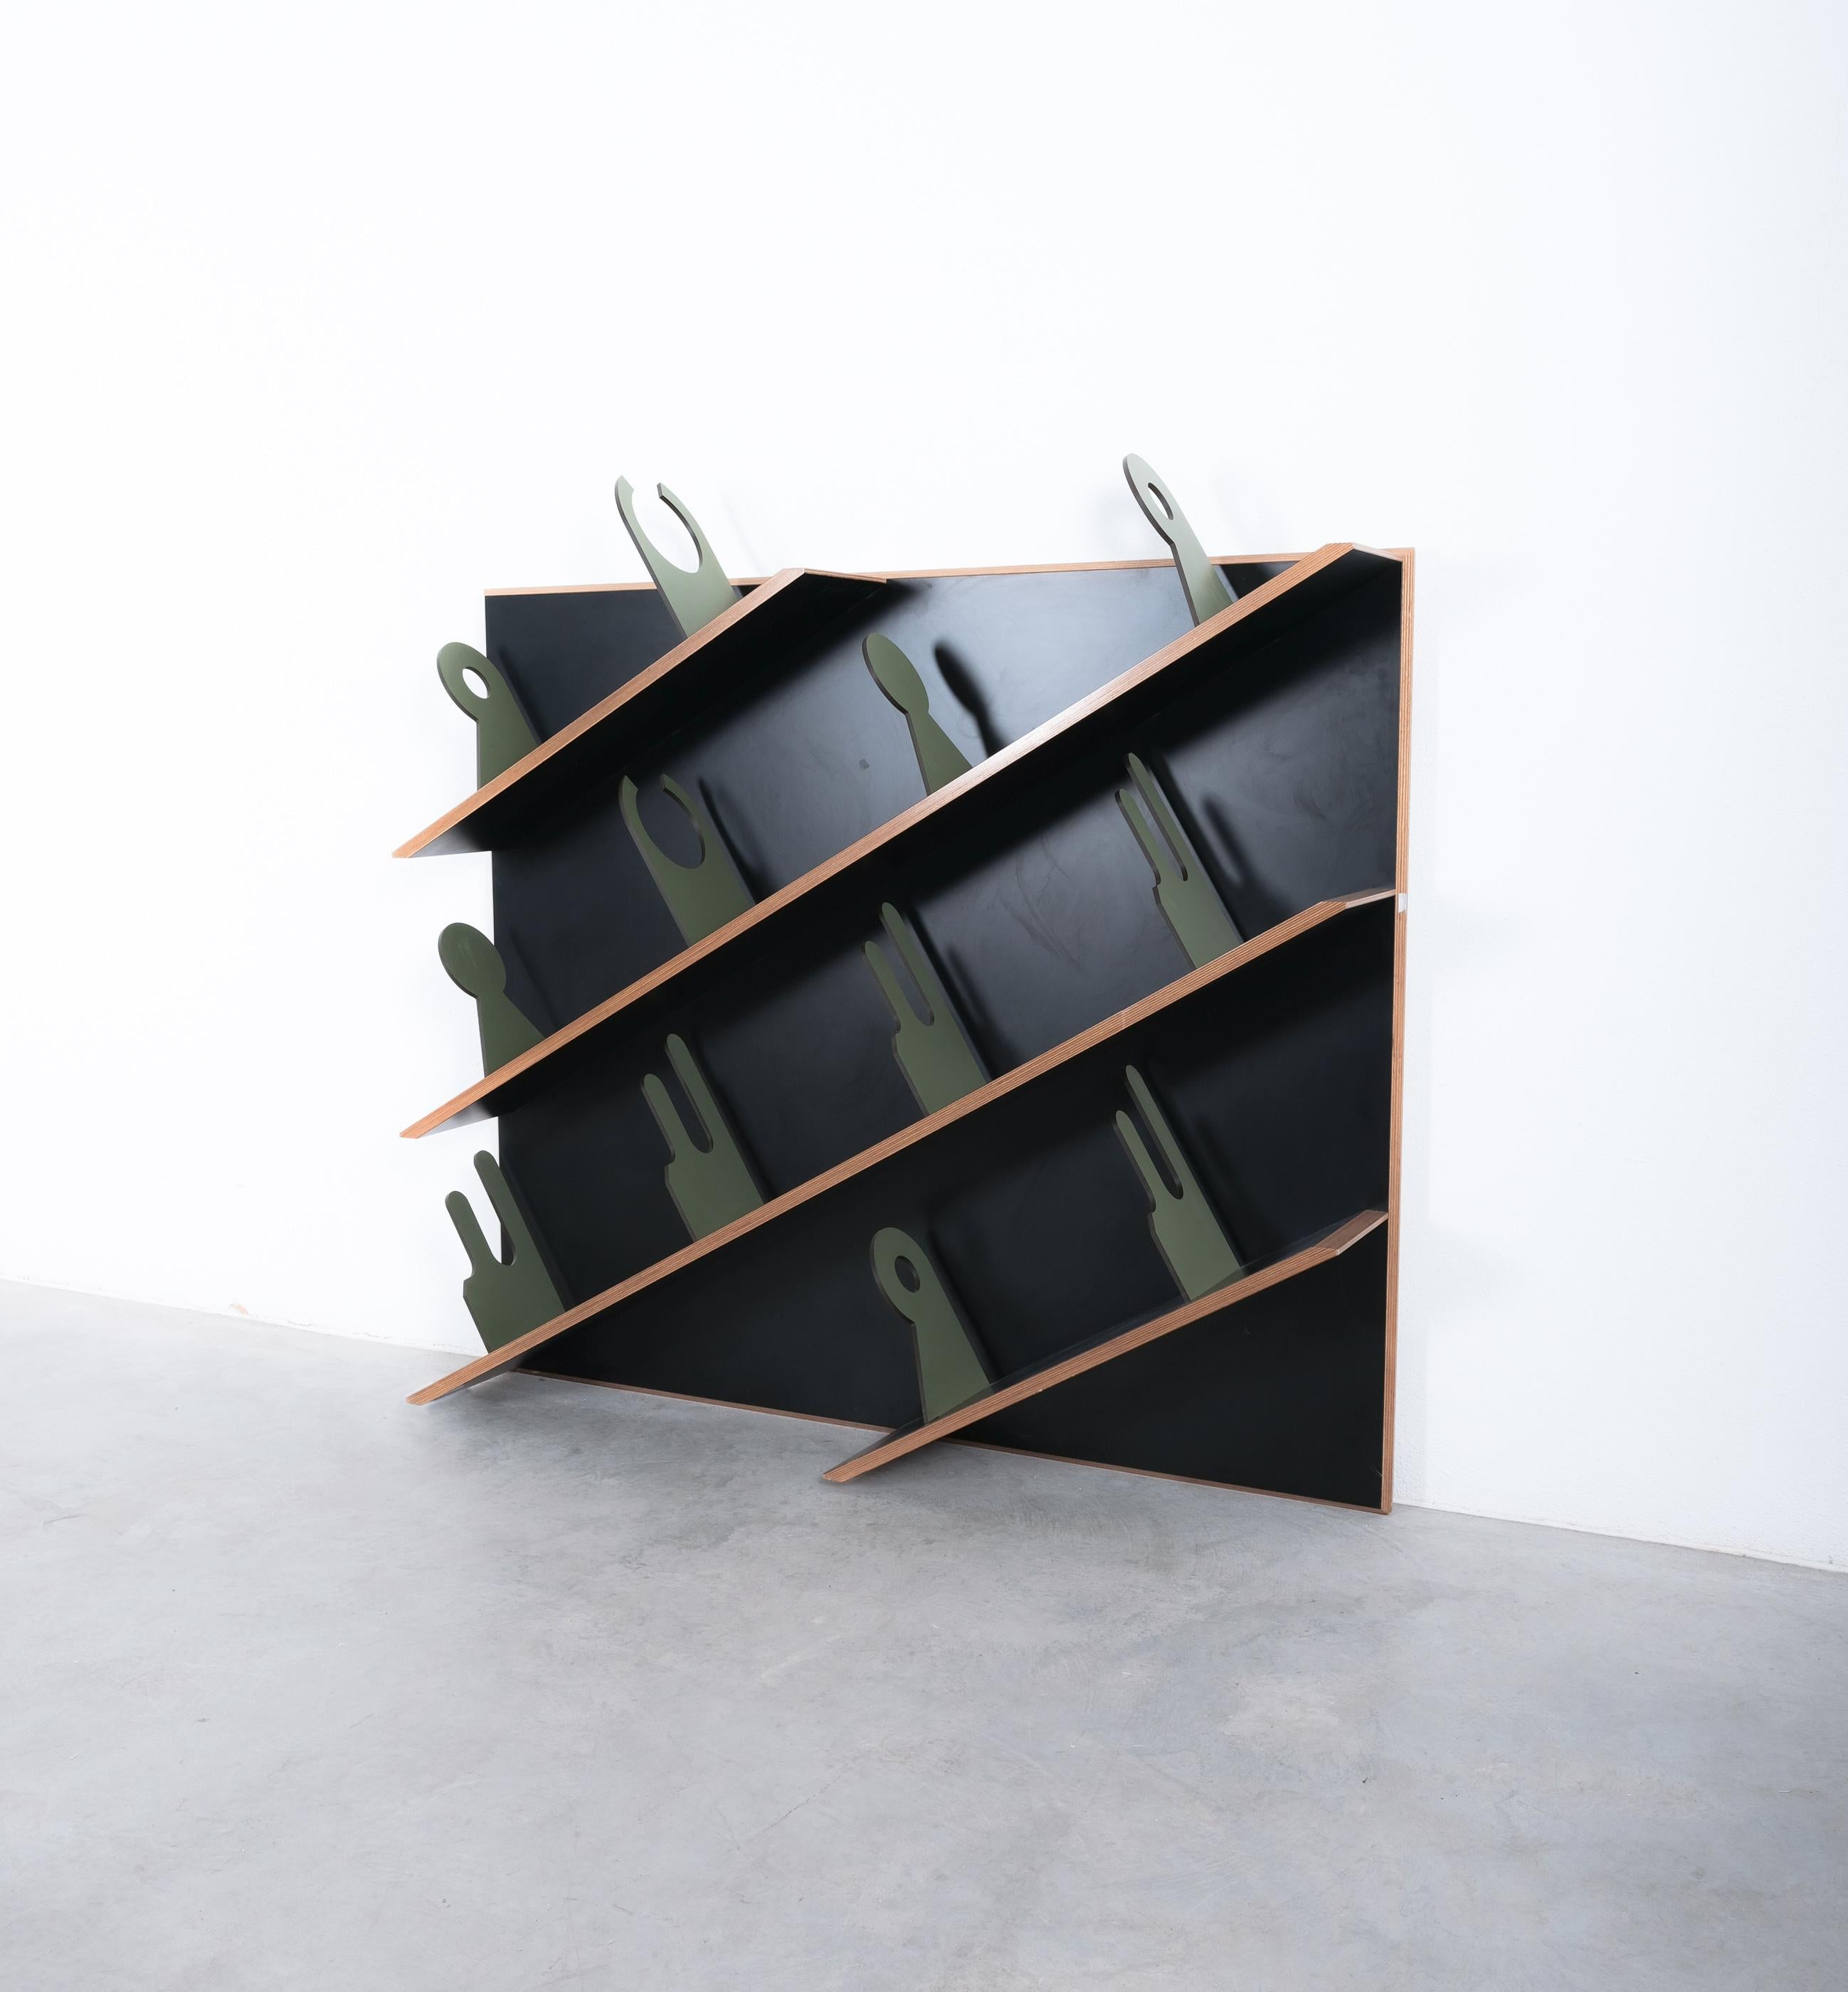 Graphical shelf system, Italy circa 1980

Very rare suspension, wall mounted shelf for large books. Well-sized black shelf with lots of space for especially larger books. It looks very cool and is very practical at the same time. The green spacers